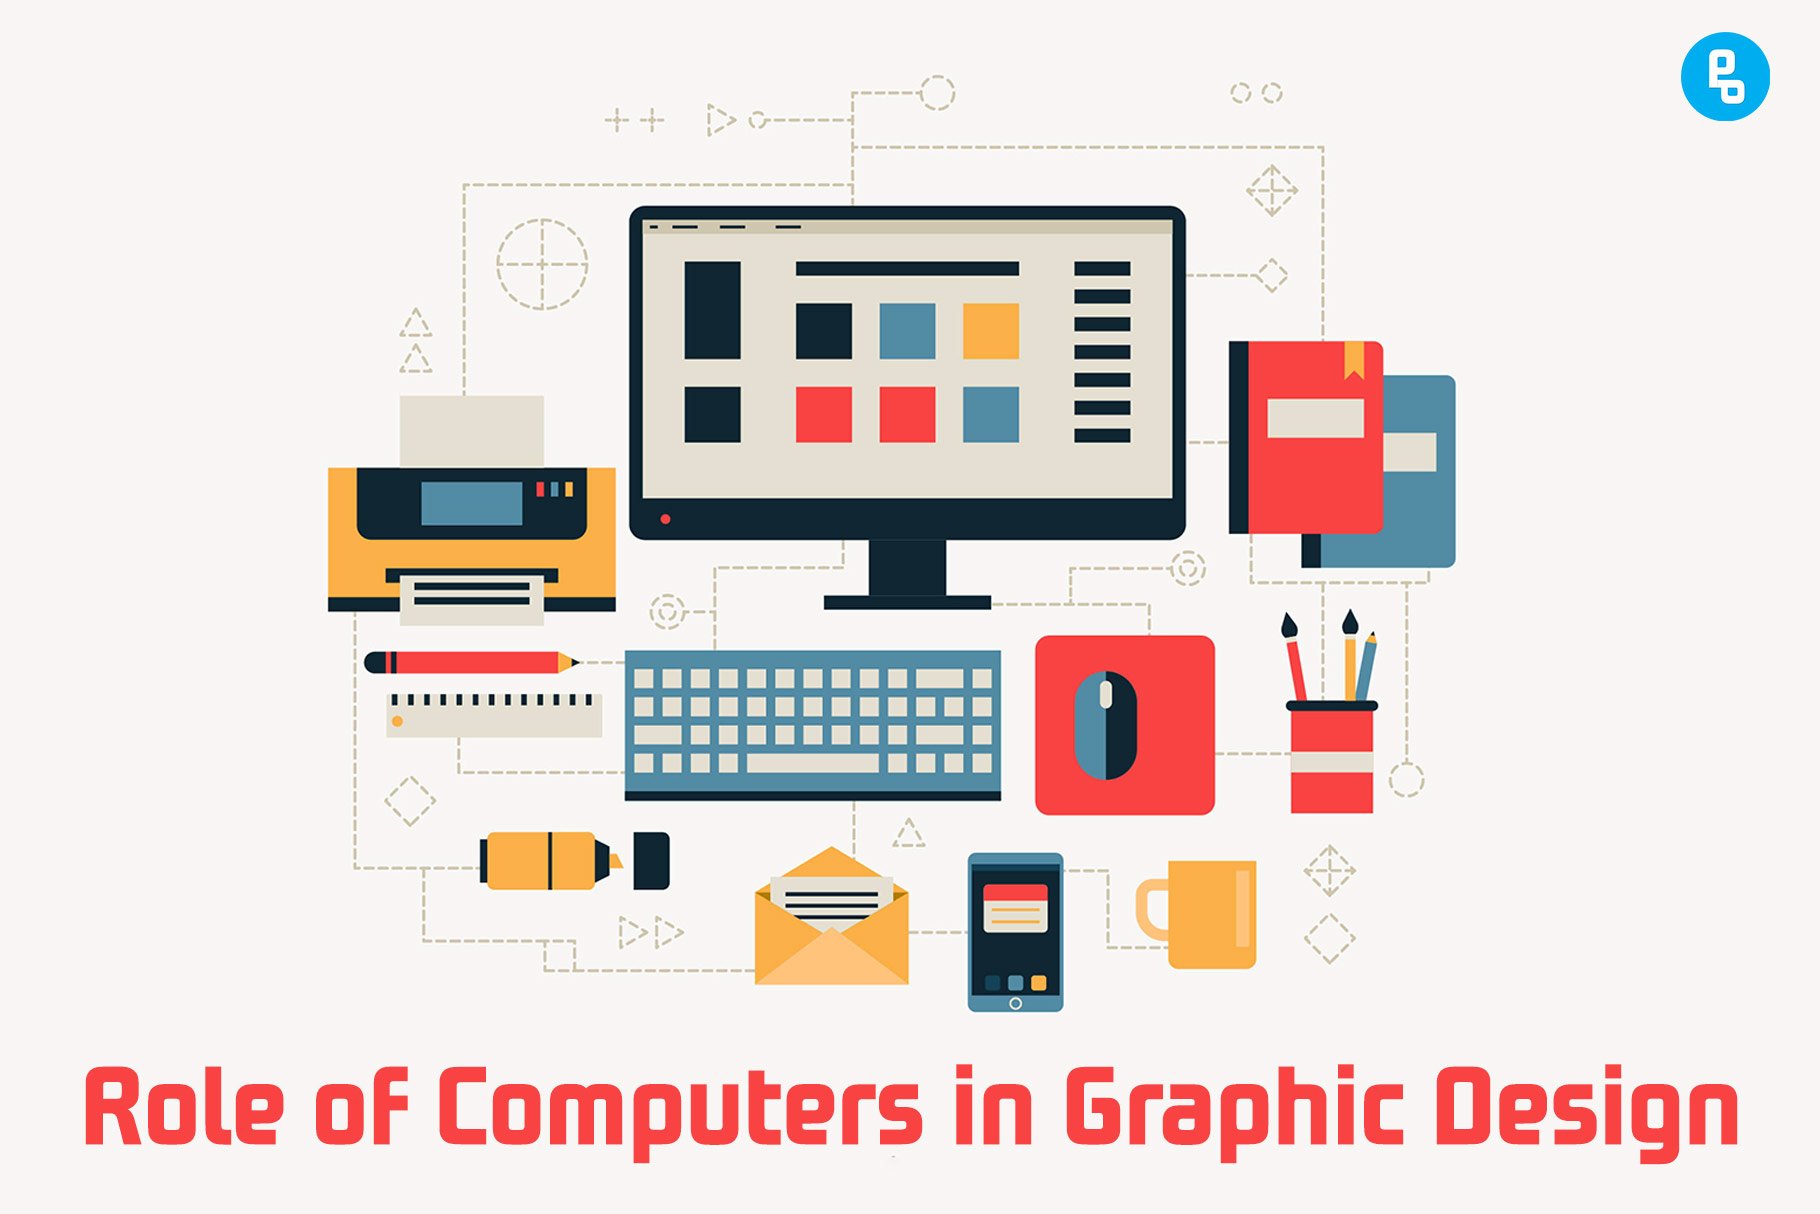 In this article, we will look at some of the ways that computers have changed graphic design over the years.